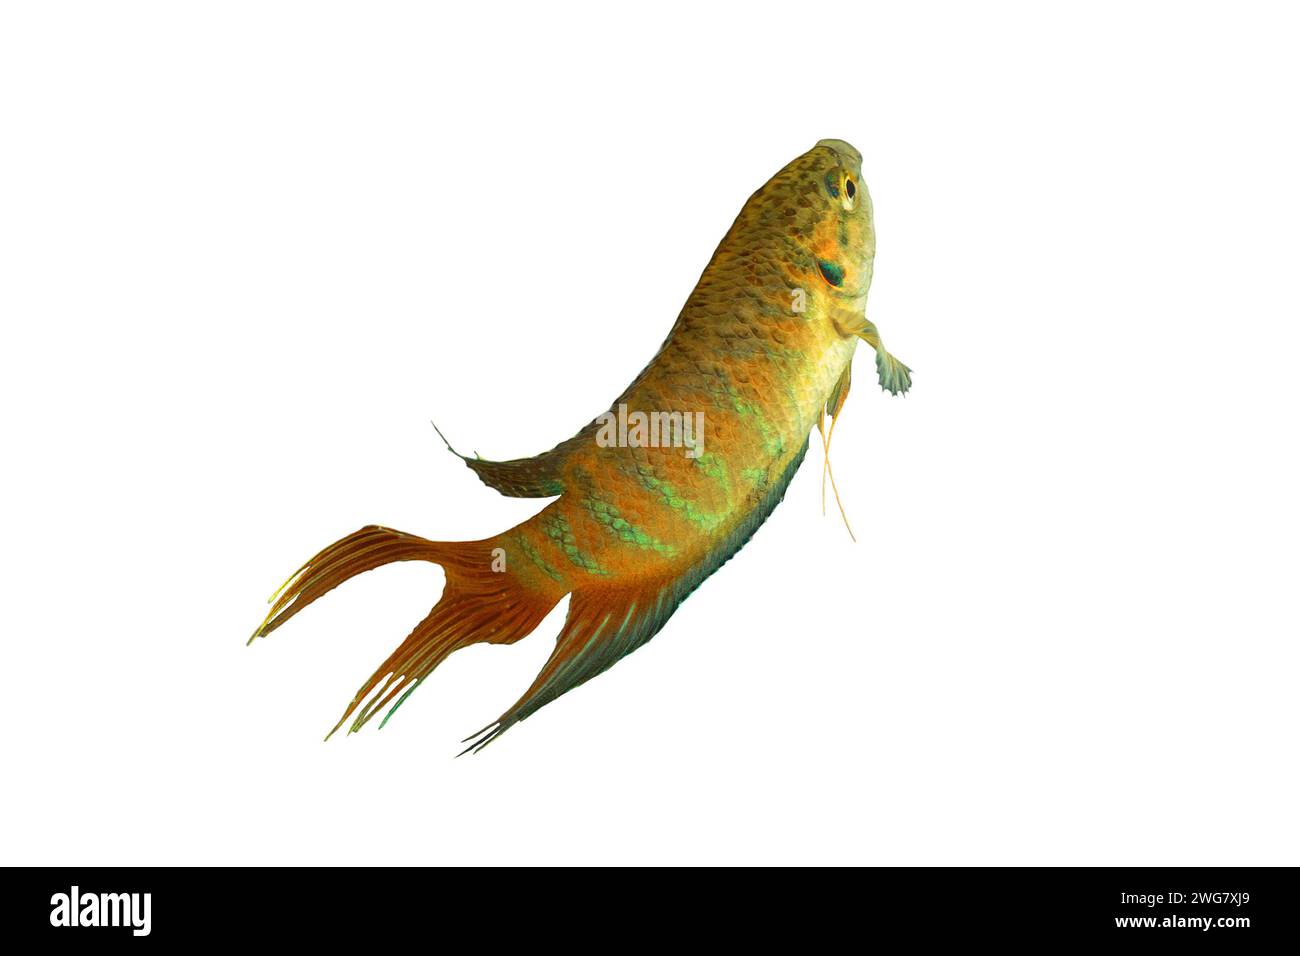 Macropodus opercularis over white background, male paradise fish for your design Stock Photo